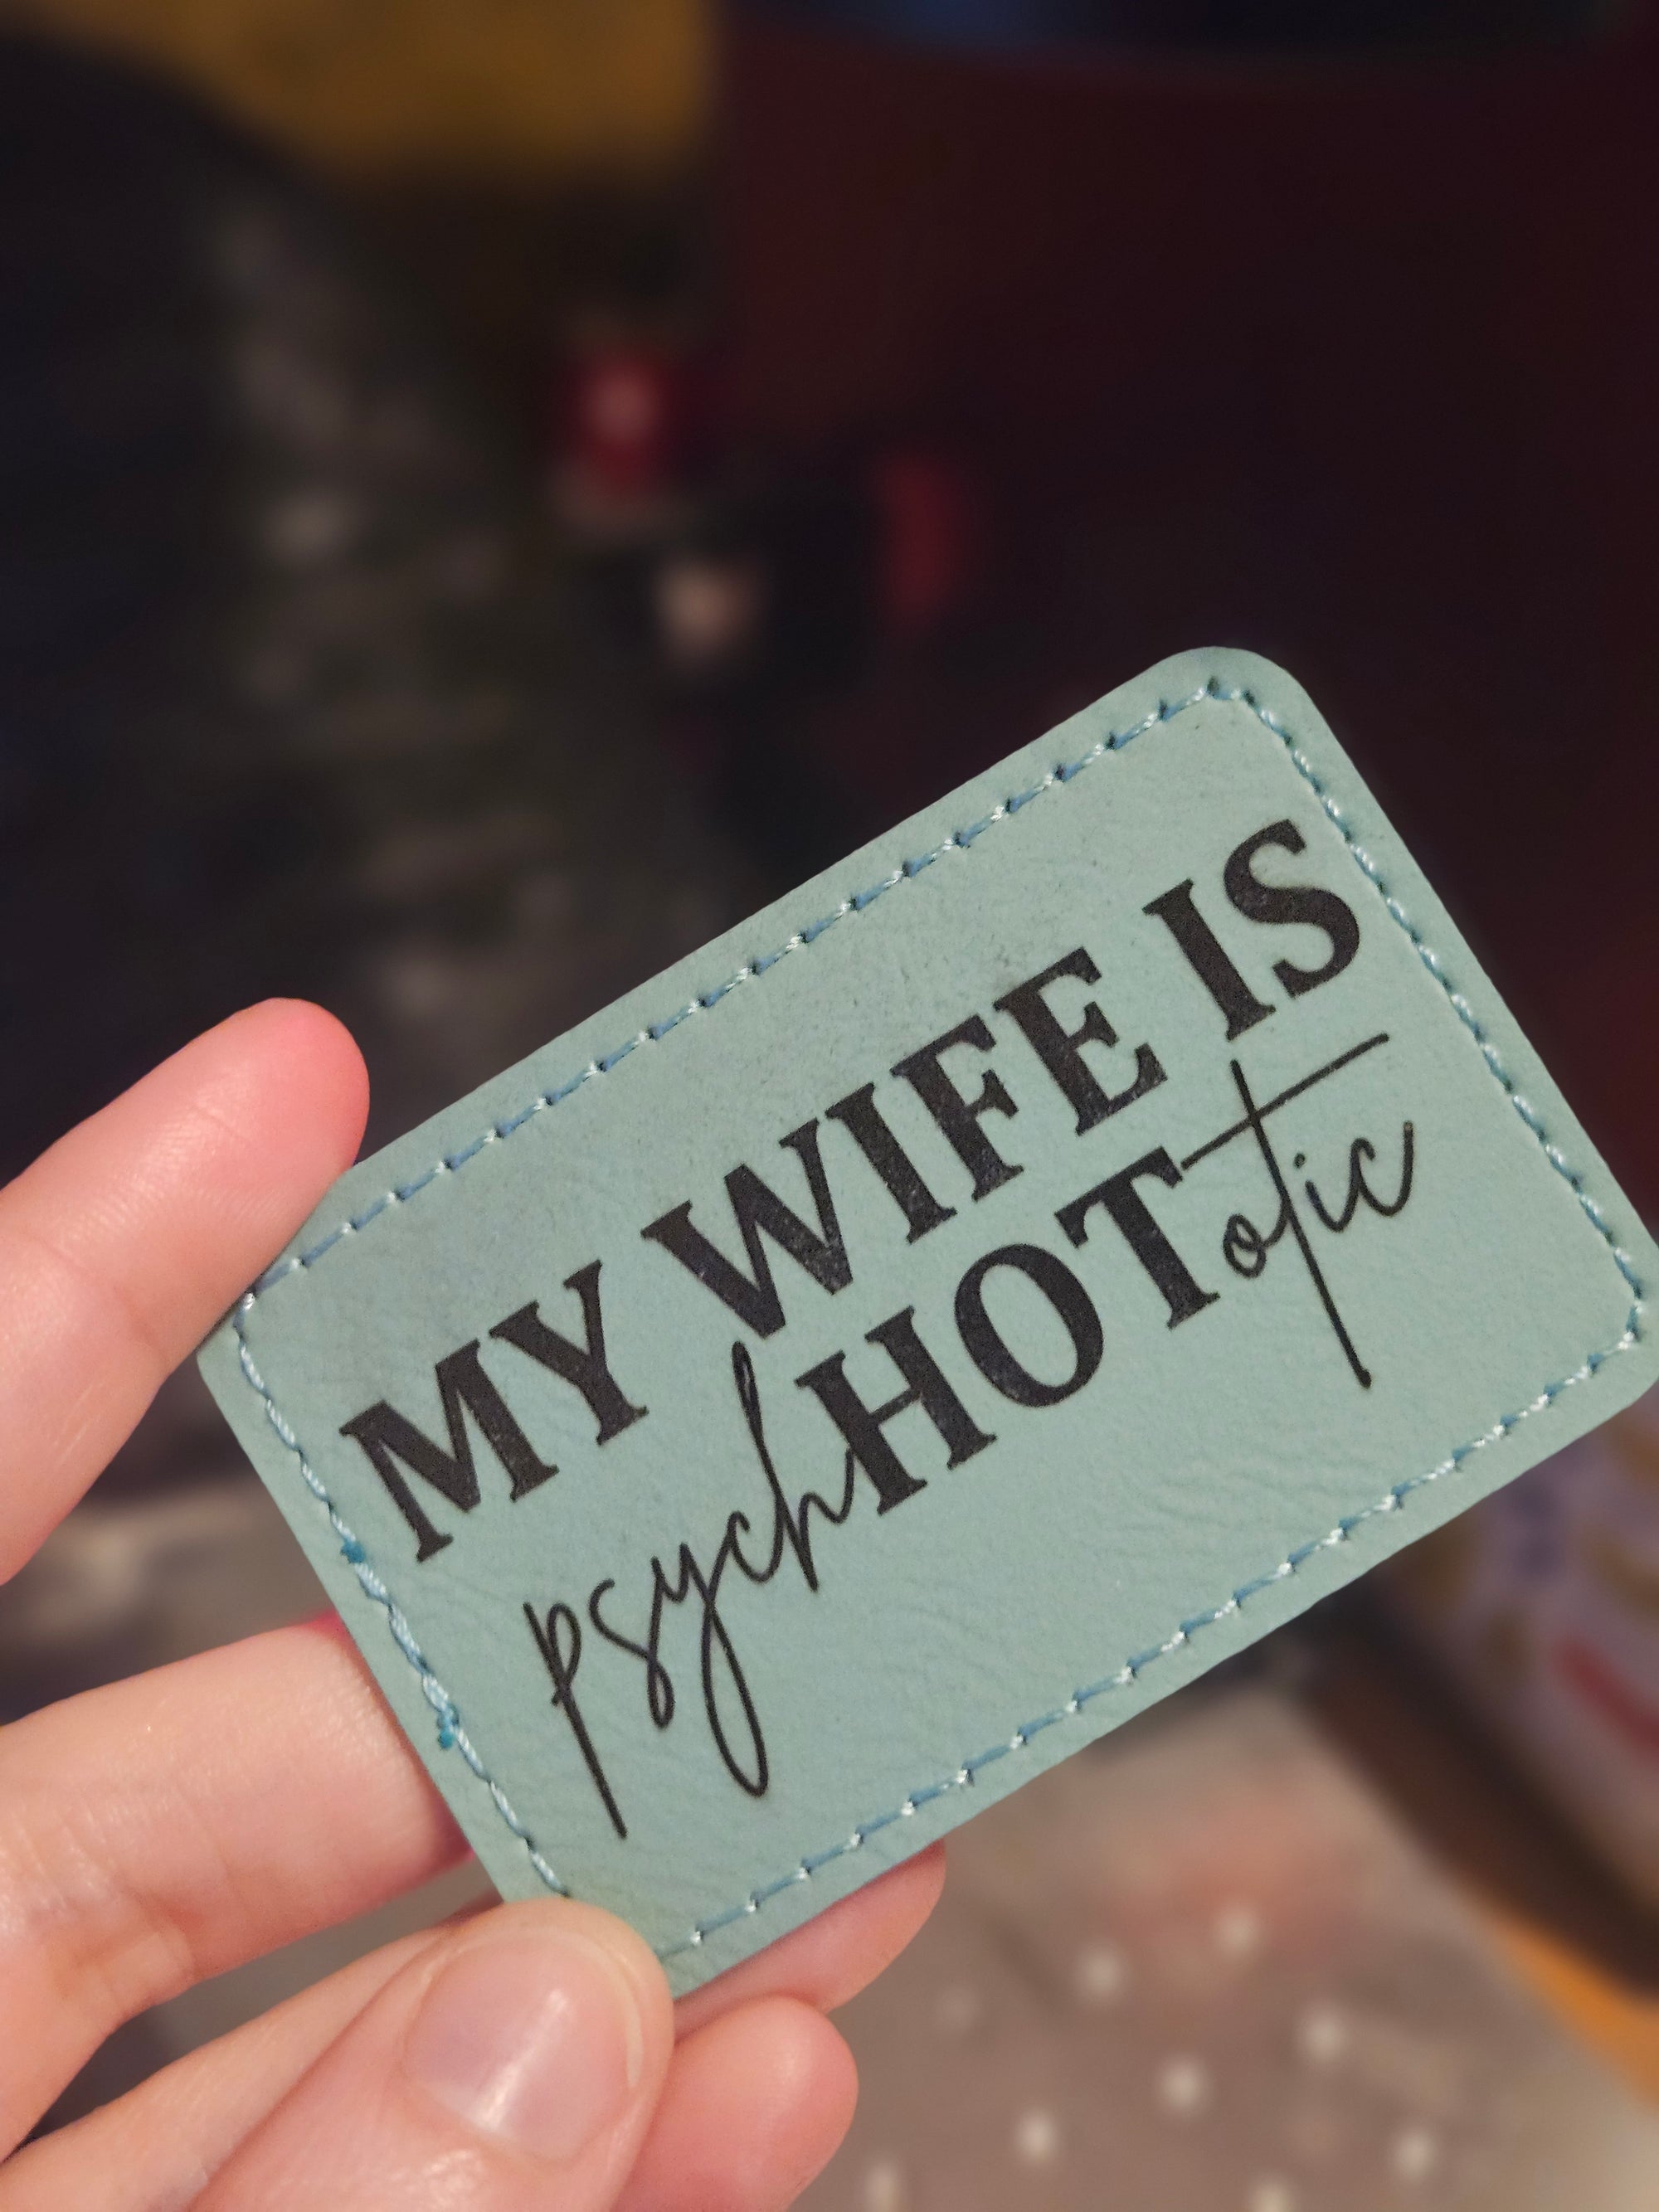 My wife is HOT-psychotic leatherette patch